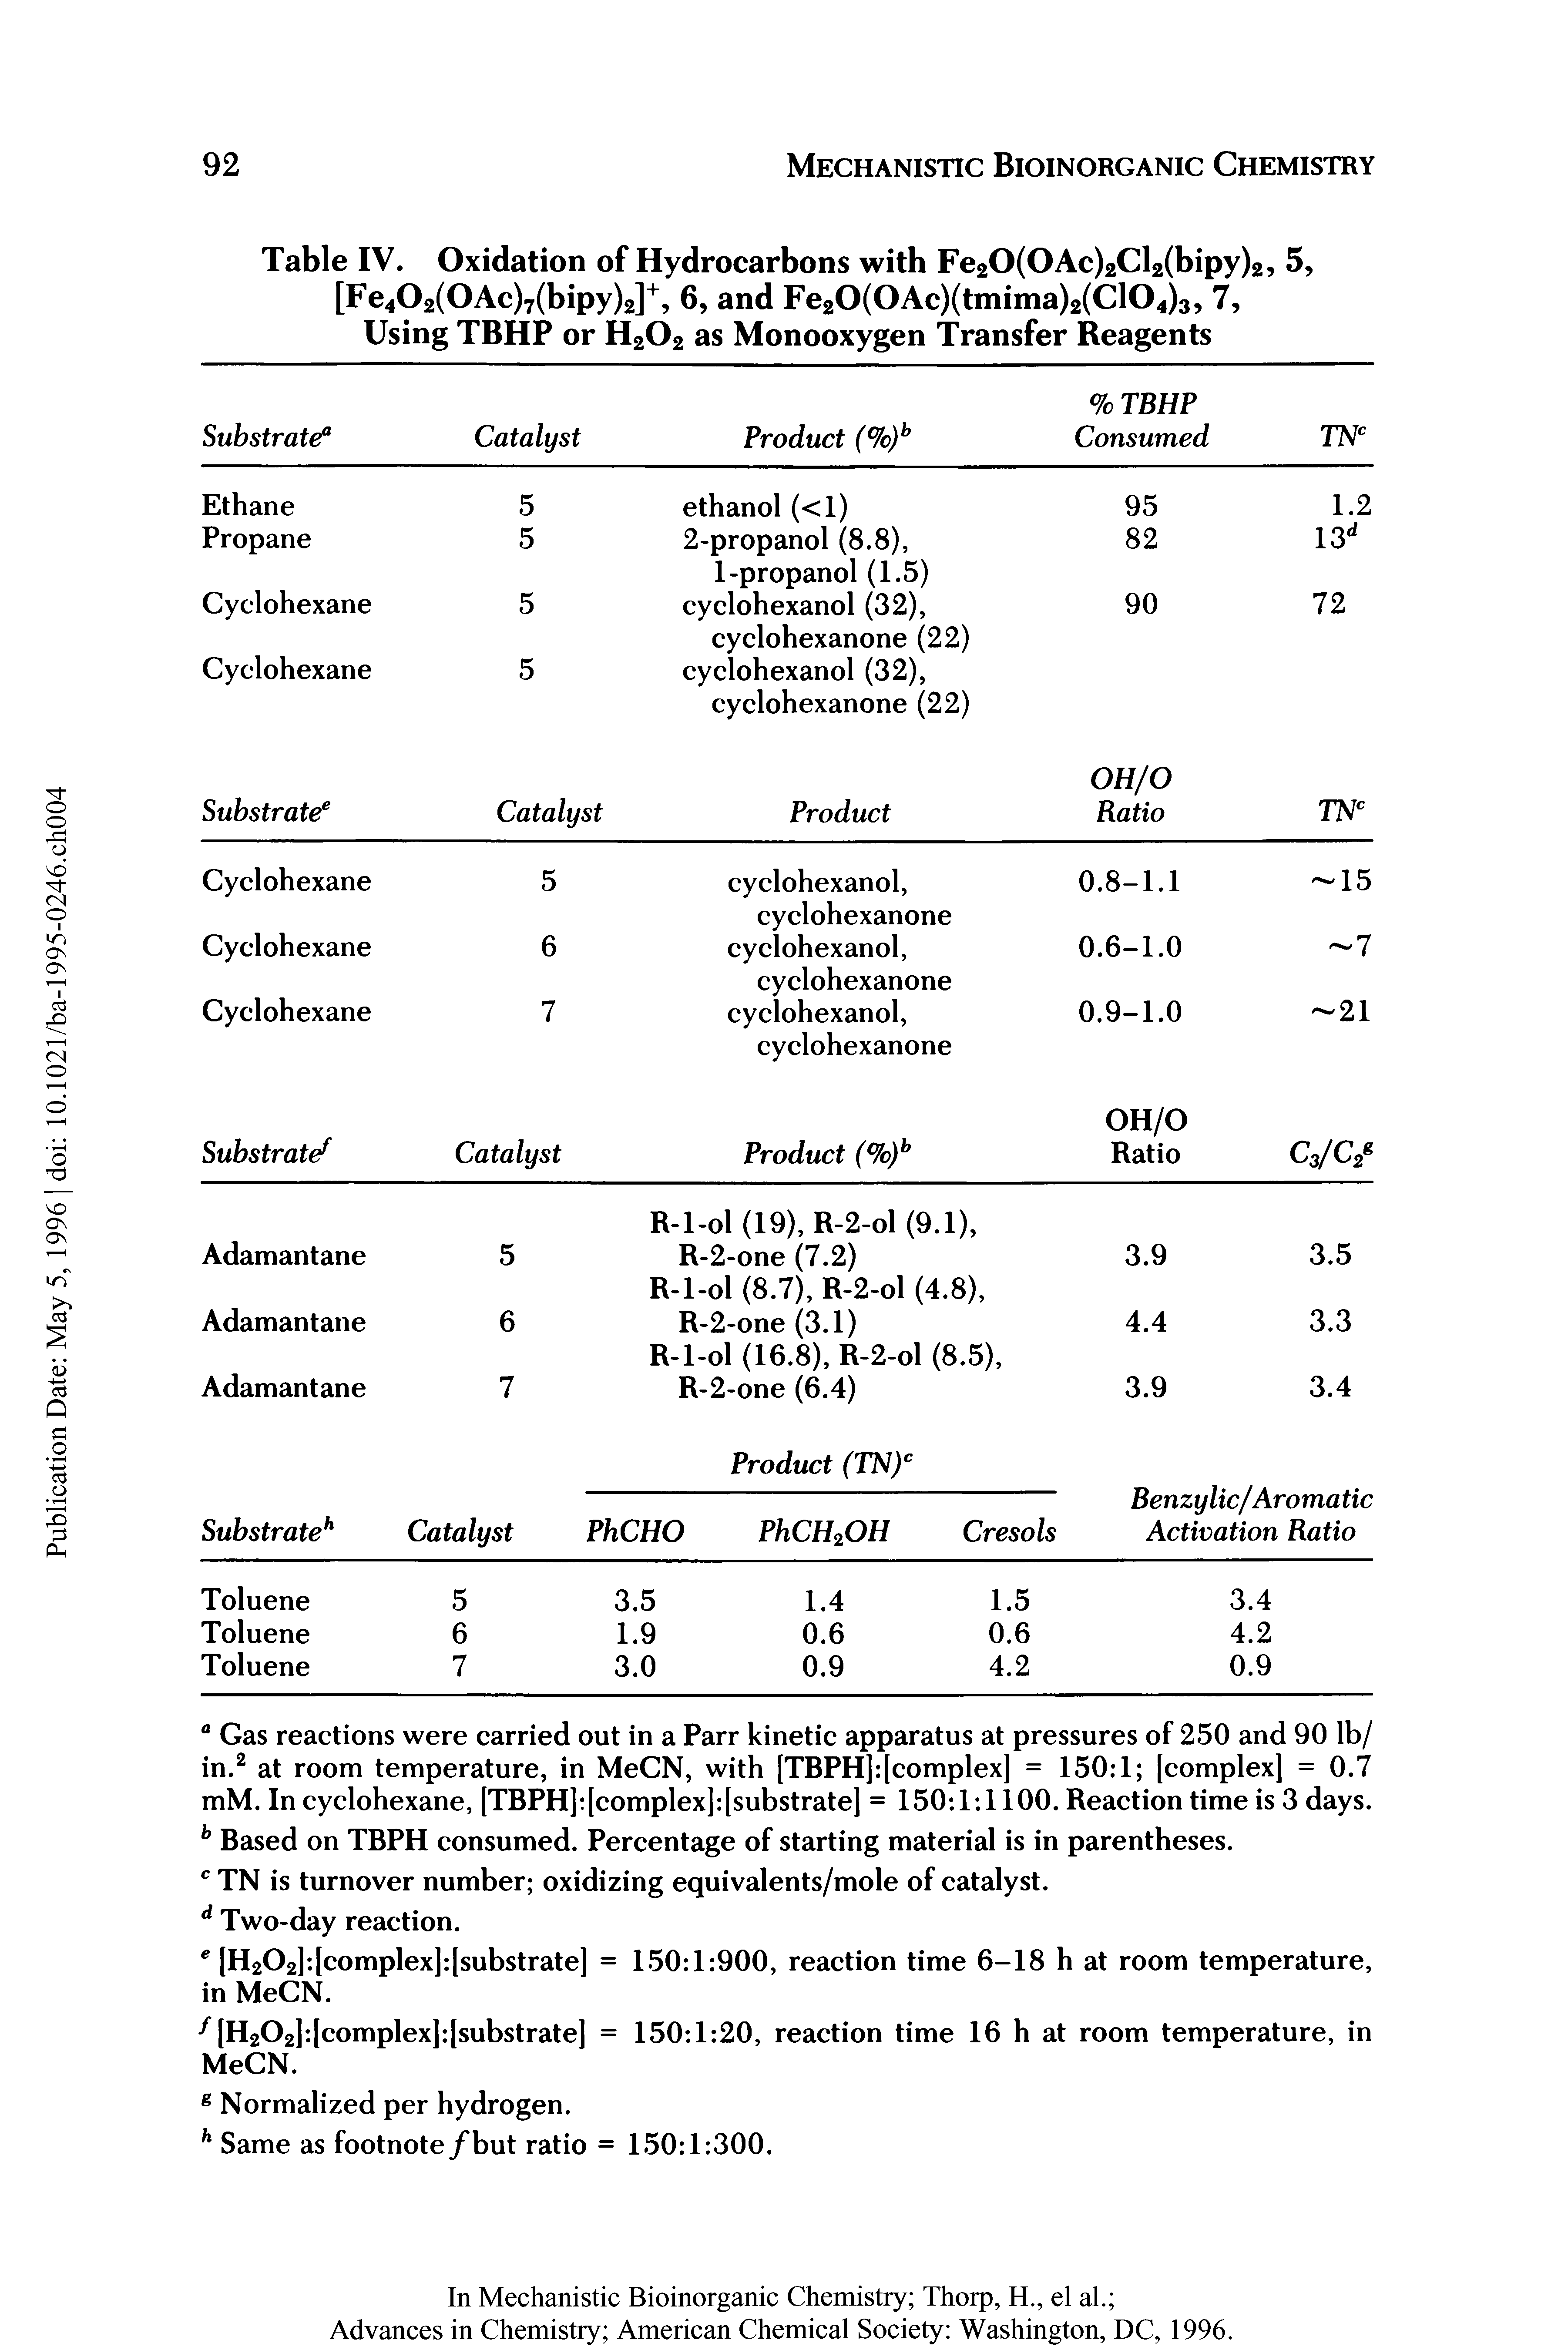 Table IV. Oxidation of Hydrocarbons with Fe20(0Ac)2Cl2(bipy)2, 5, [Fe402(0Ac)7(bipy)2]+, 6, and Fe20(0Ac)(tmima)2(Cl04)3, 7, Using TBHP or H202 as Monooxygen Transfer Reagents...